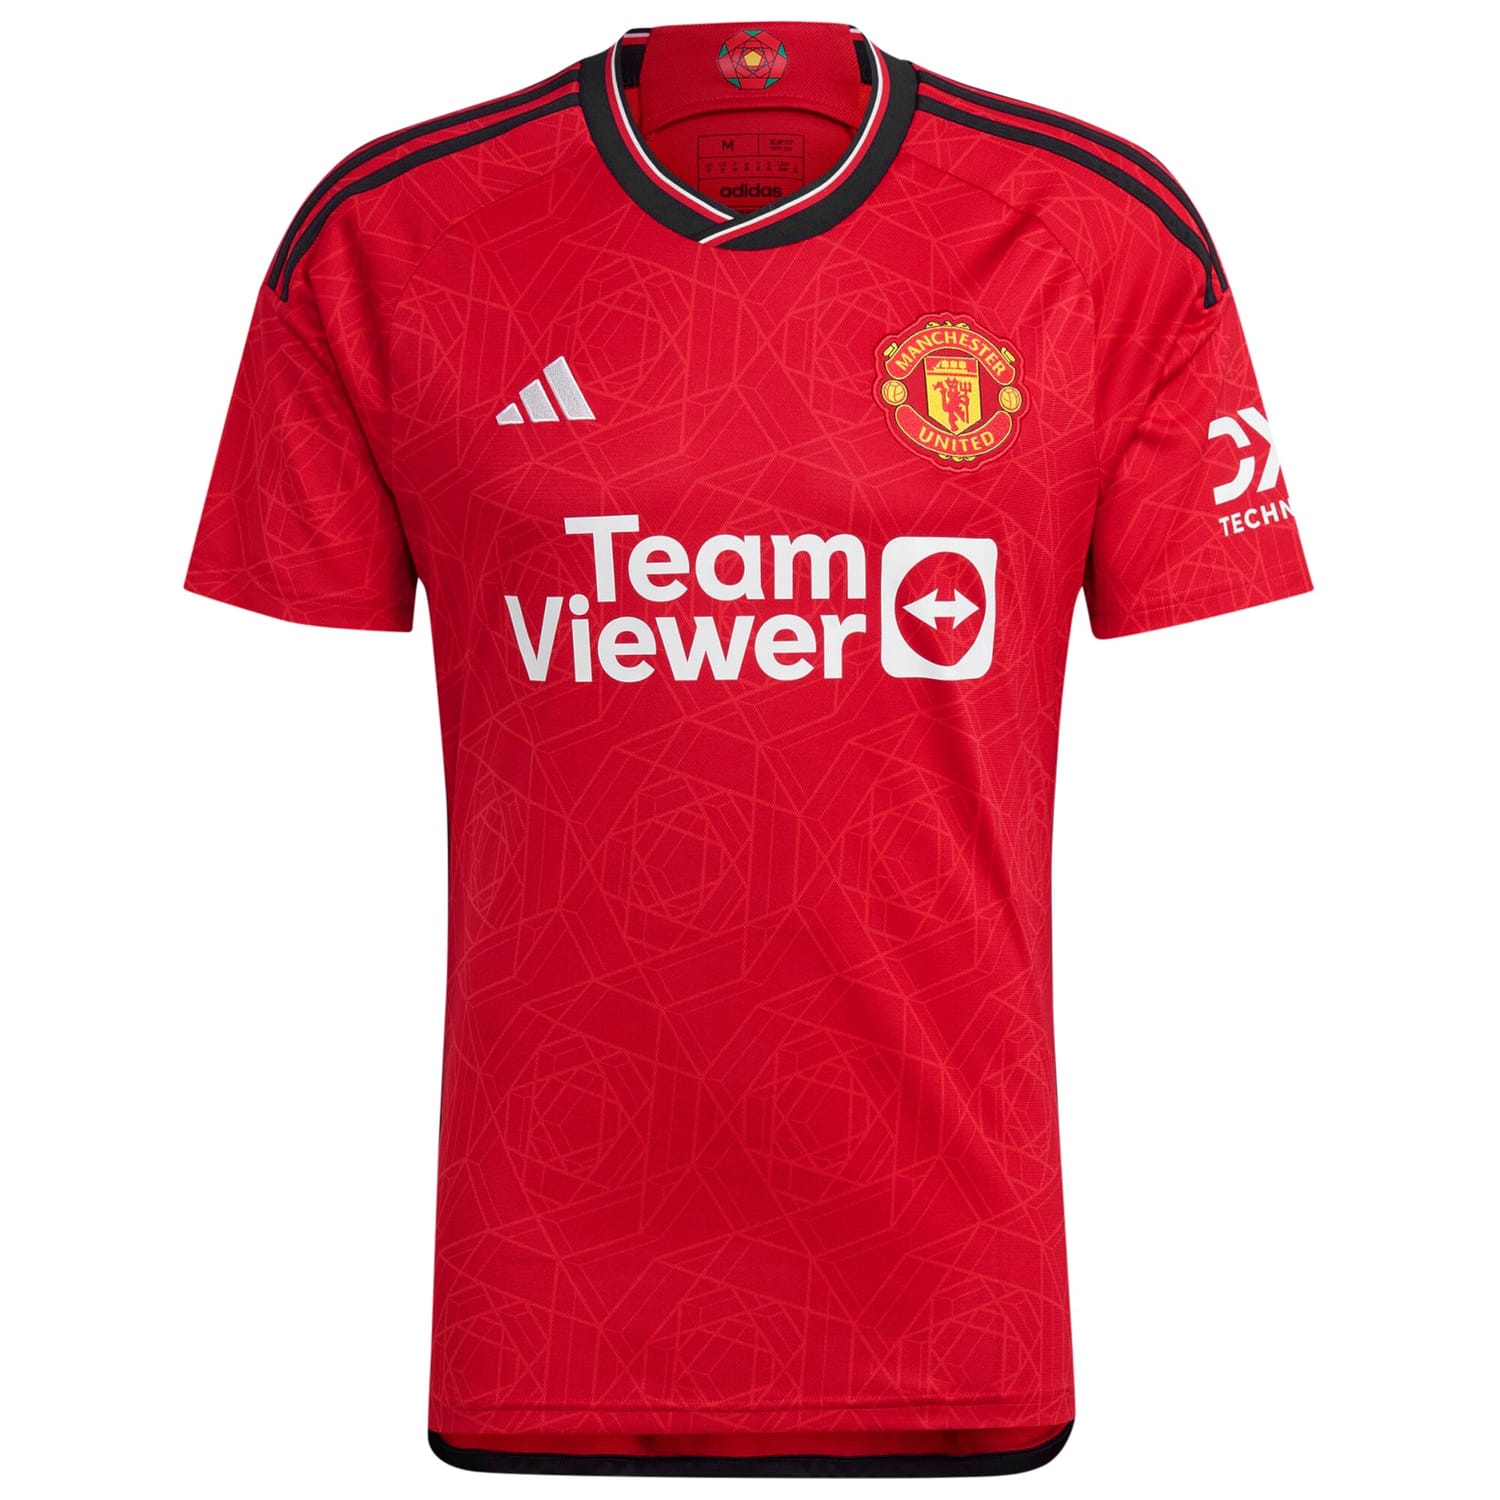 Premier League Manchester United Home Cup Jersey Shirt 2023-24 player Melvine Malard printing for Men